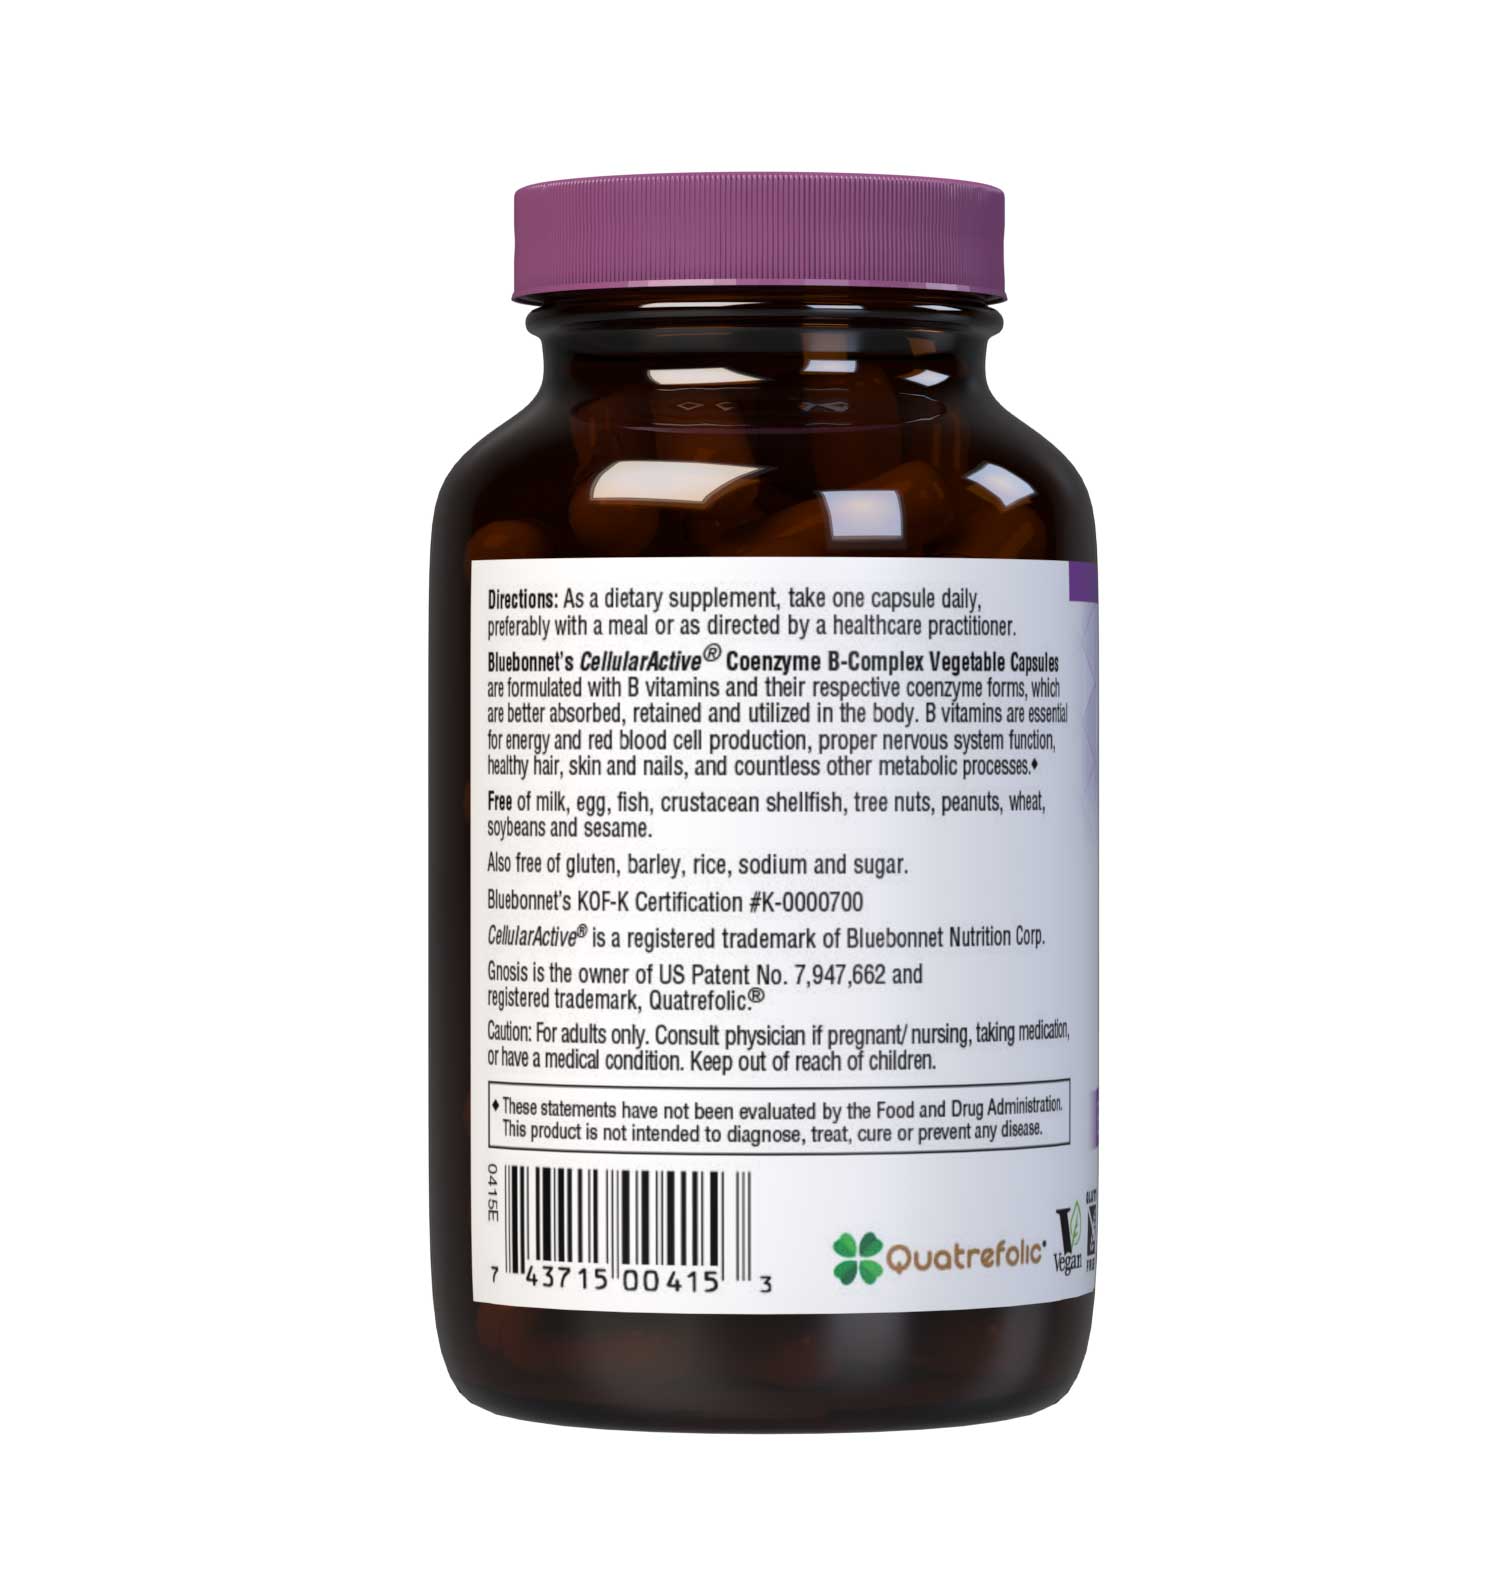 Bluebonnet’s CellularActive Coenzyme B-Complex Vegetable Capsules are formulated with B vitamins and their respective coenzyme forms, which are better absorbed, retained and utilized in the body. B vitamins are essential for energy and red blood cell production, proper nervous system function, healthy hair, skin and nails, and countless other metabolic processes. Description panel. #size_100 count